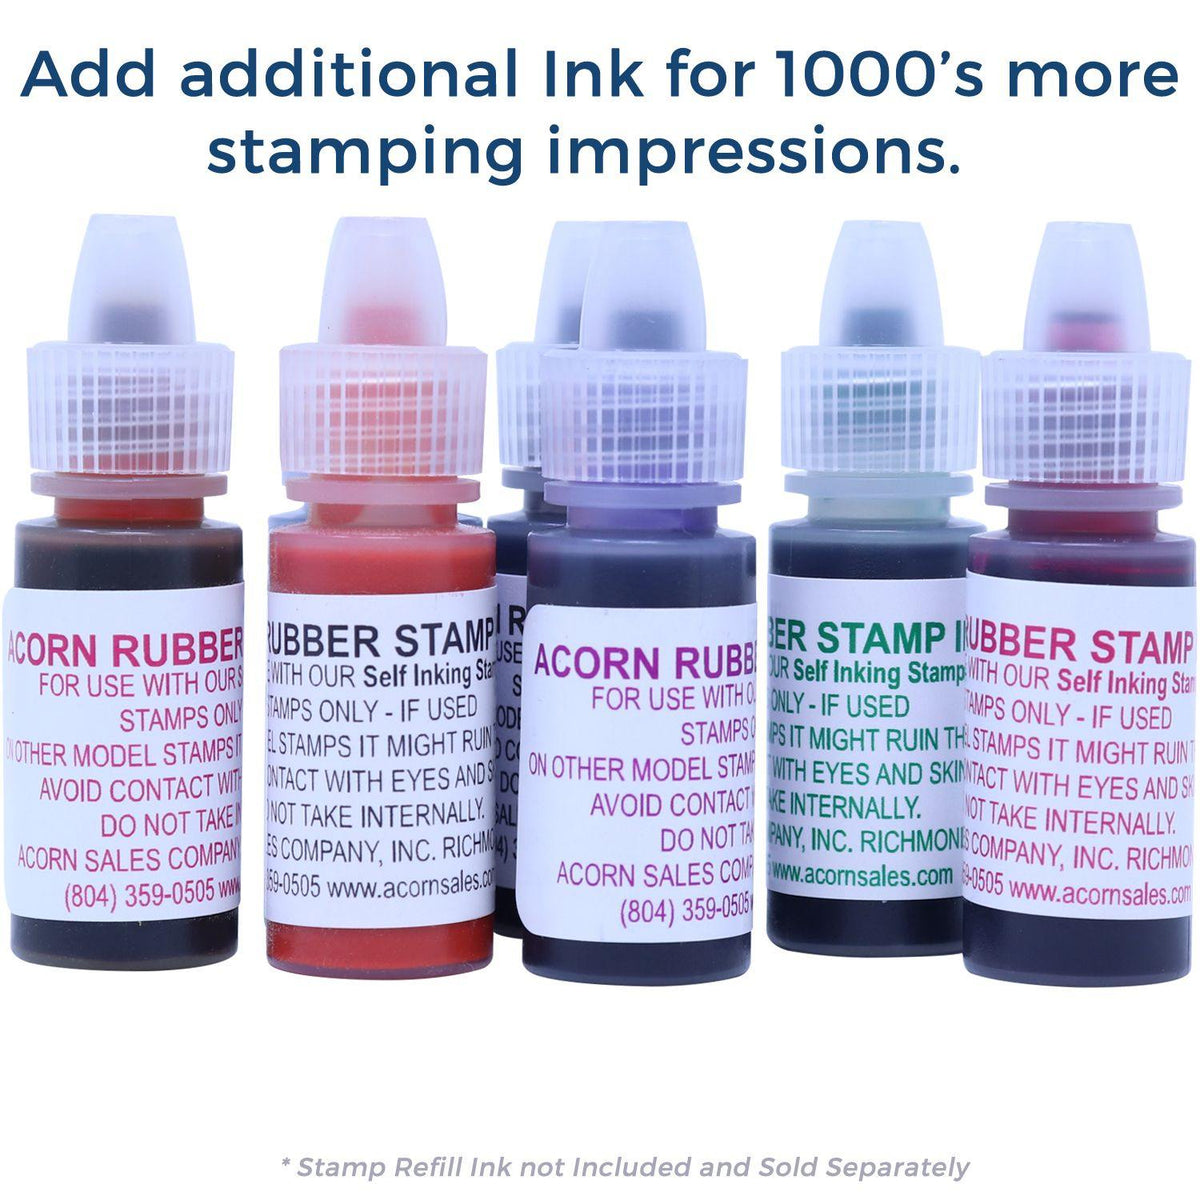 Refill Inks for Large Pre-Inked Entered with Date Box Stamp Available